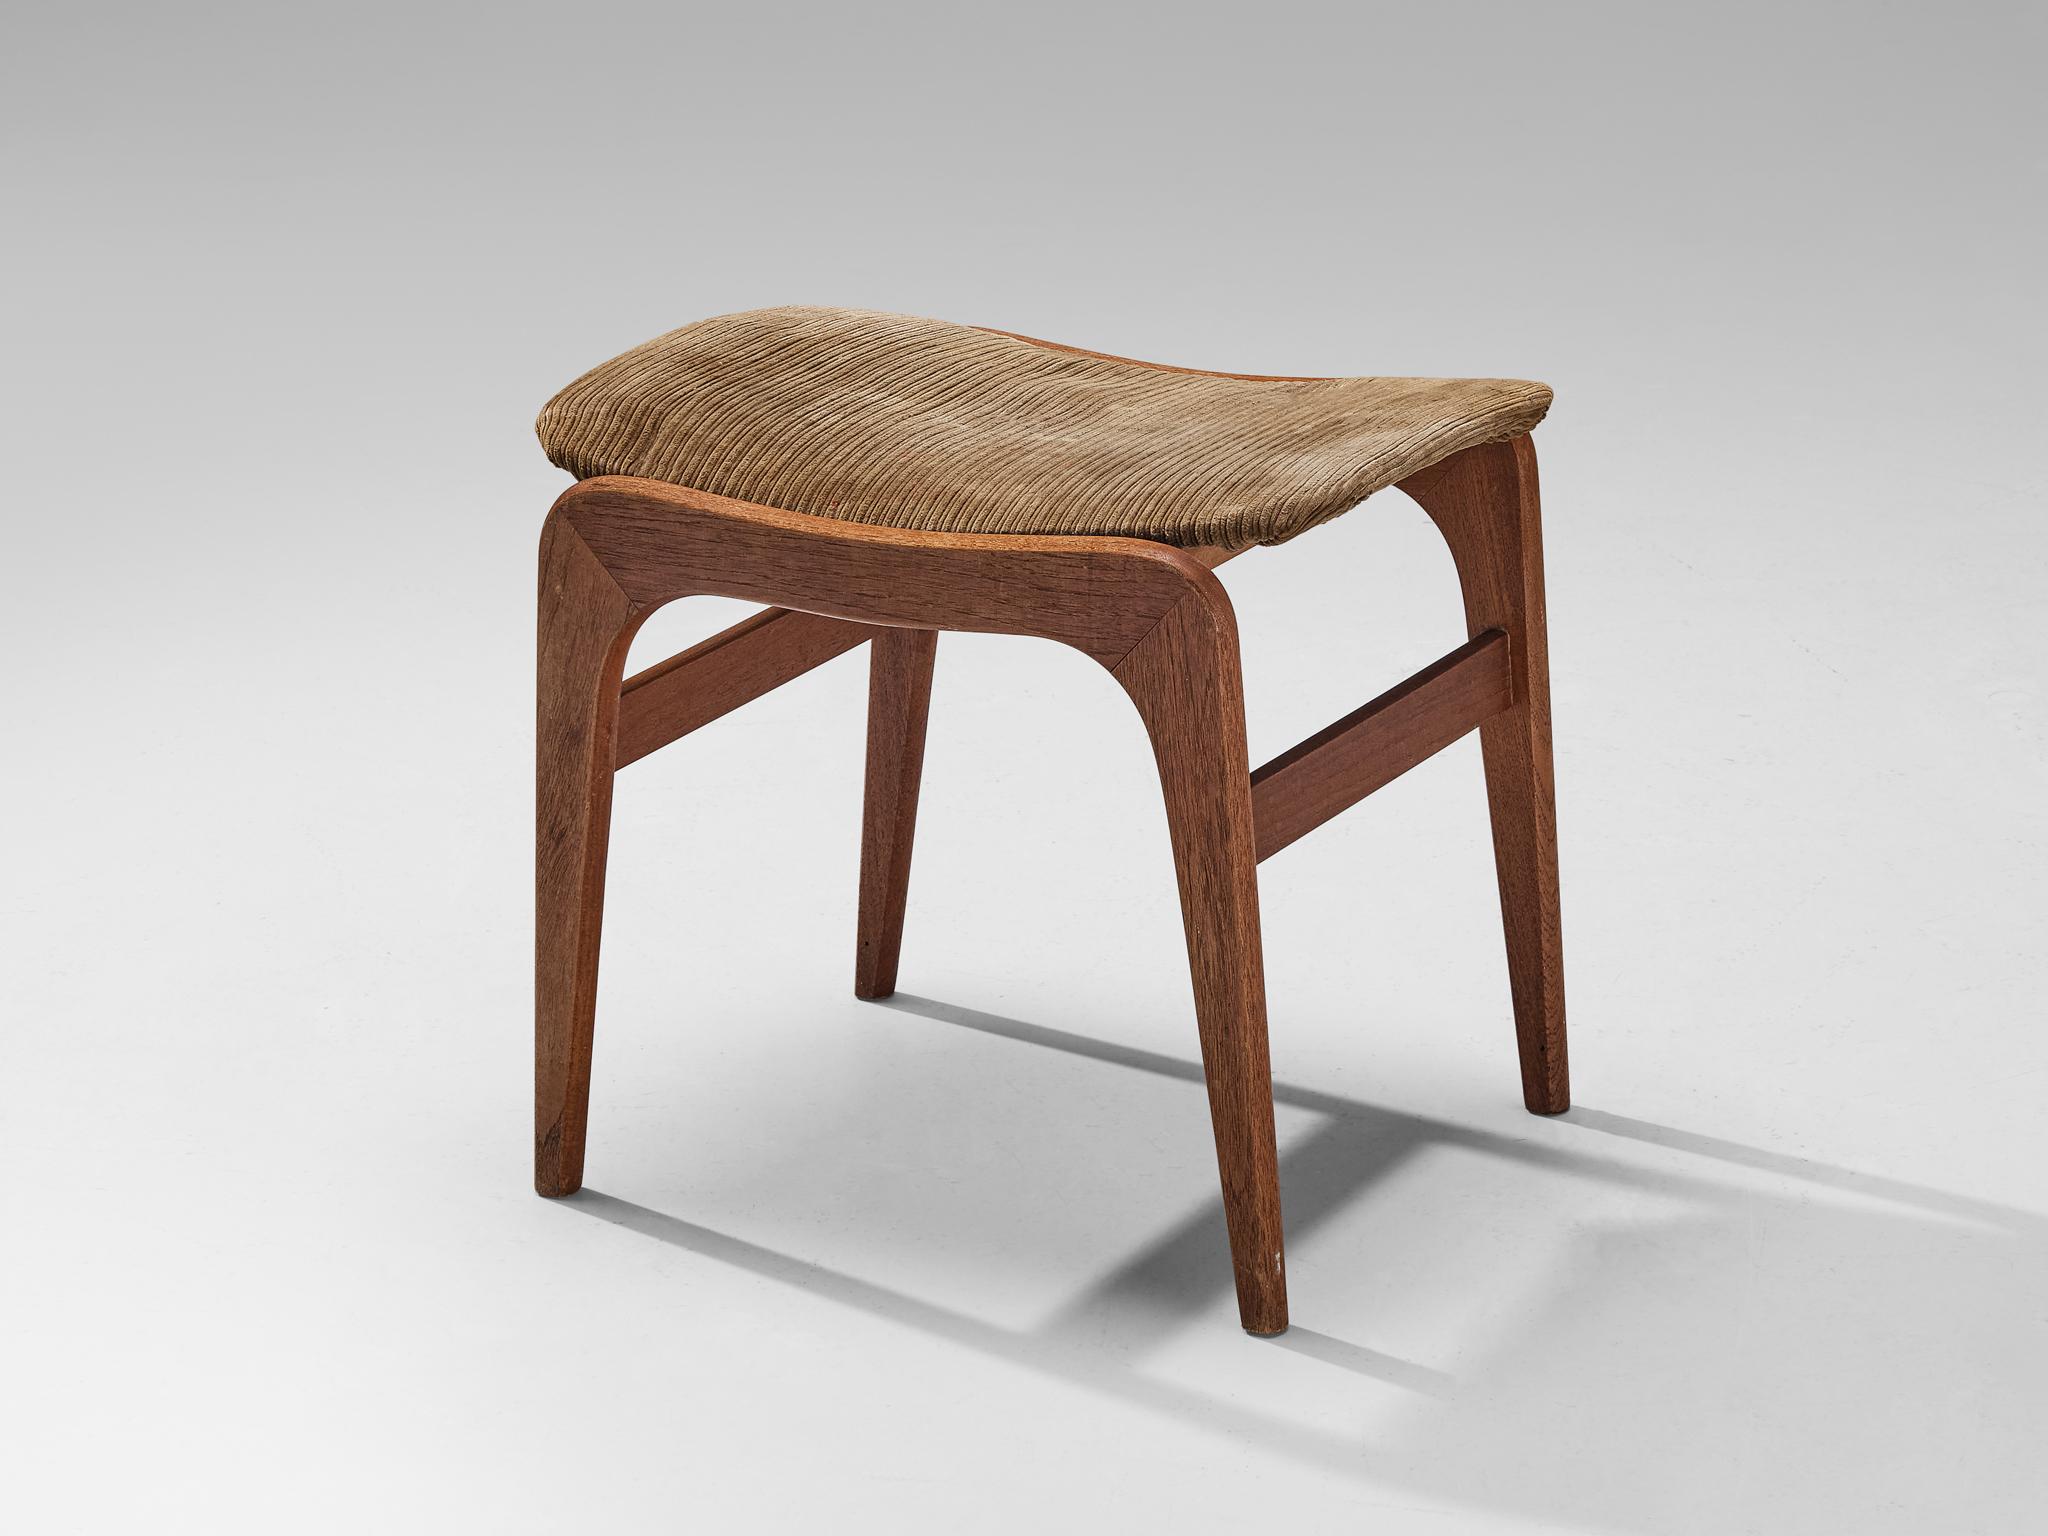 Mid-20th Century Danish Stool or Ottoman in Teak and Brown Corduroy